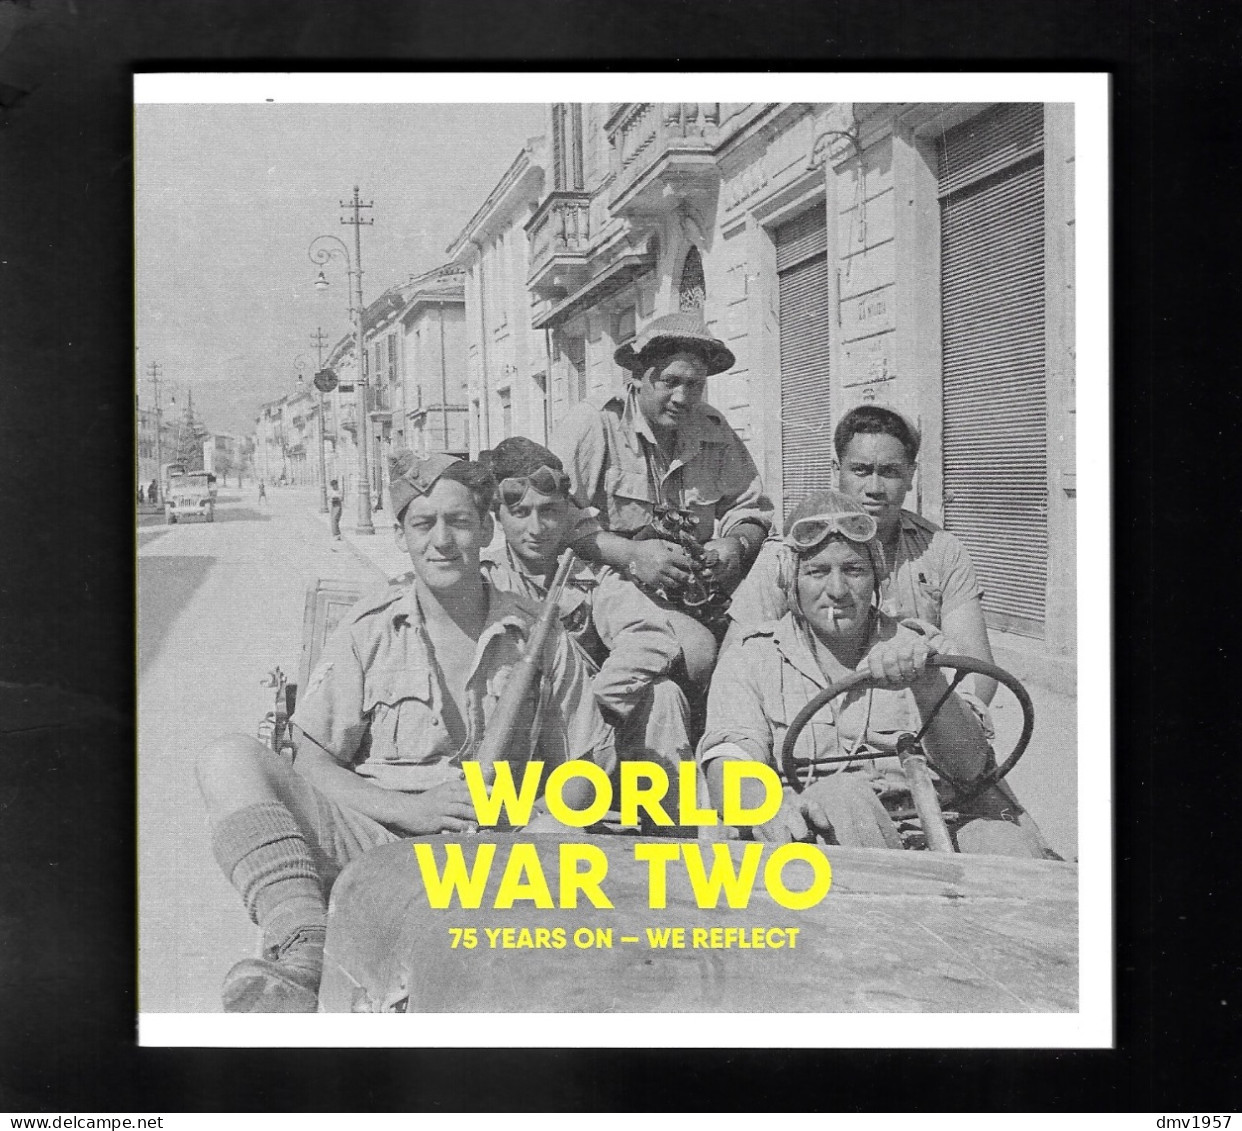 New Zealand 2001 World War Two - 75 Years On Booklet (28 X $1.30 Stamps) - Booklets